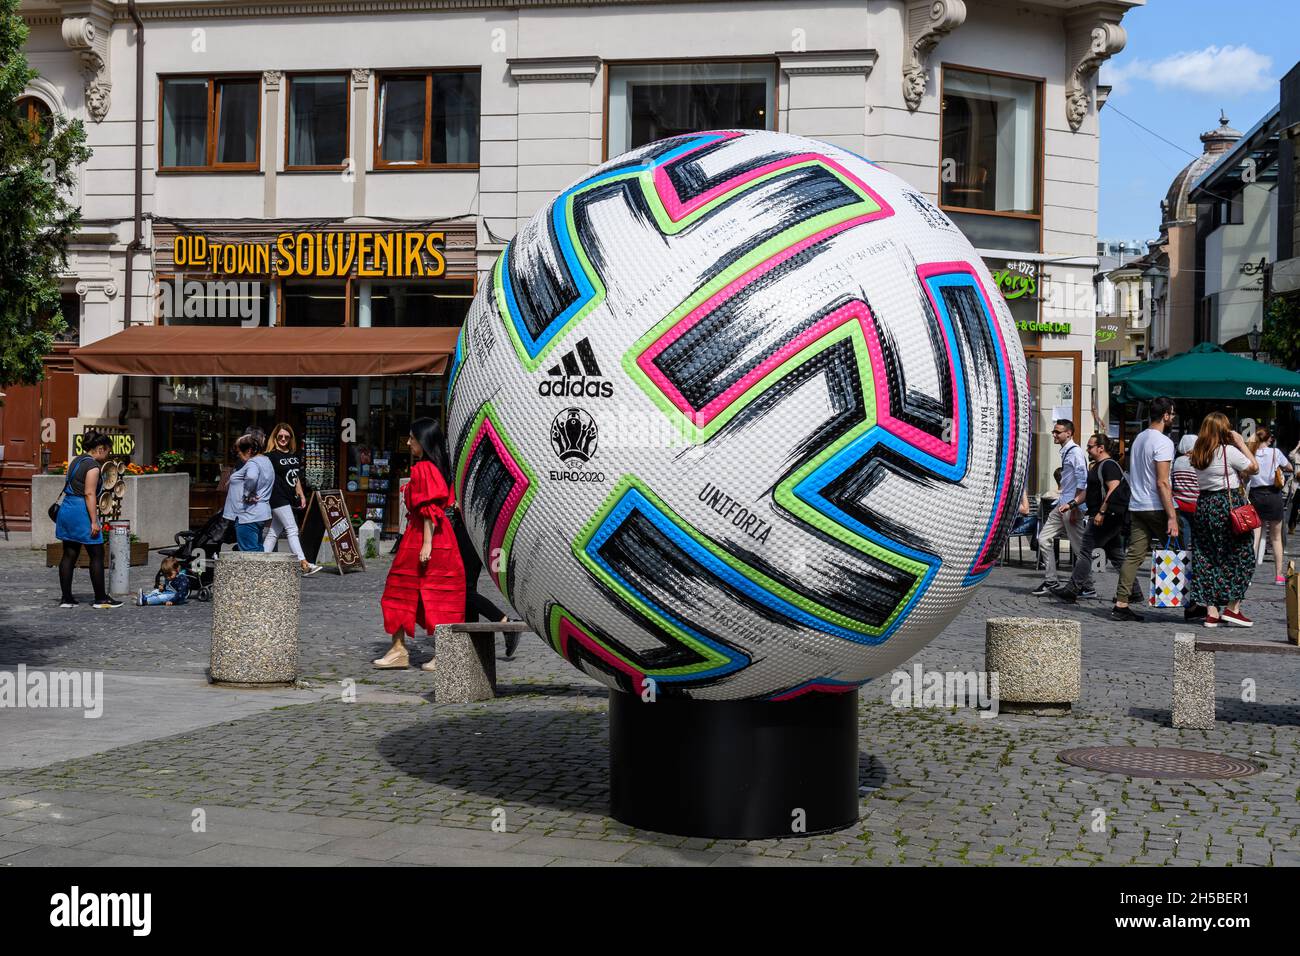 Bucharest, Romania, 5 June 2021 - Official Adidas Uniforia large match ball  is displayed in a street in the old city center as of a host city for UEFA  Stock Photo - Alamy